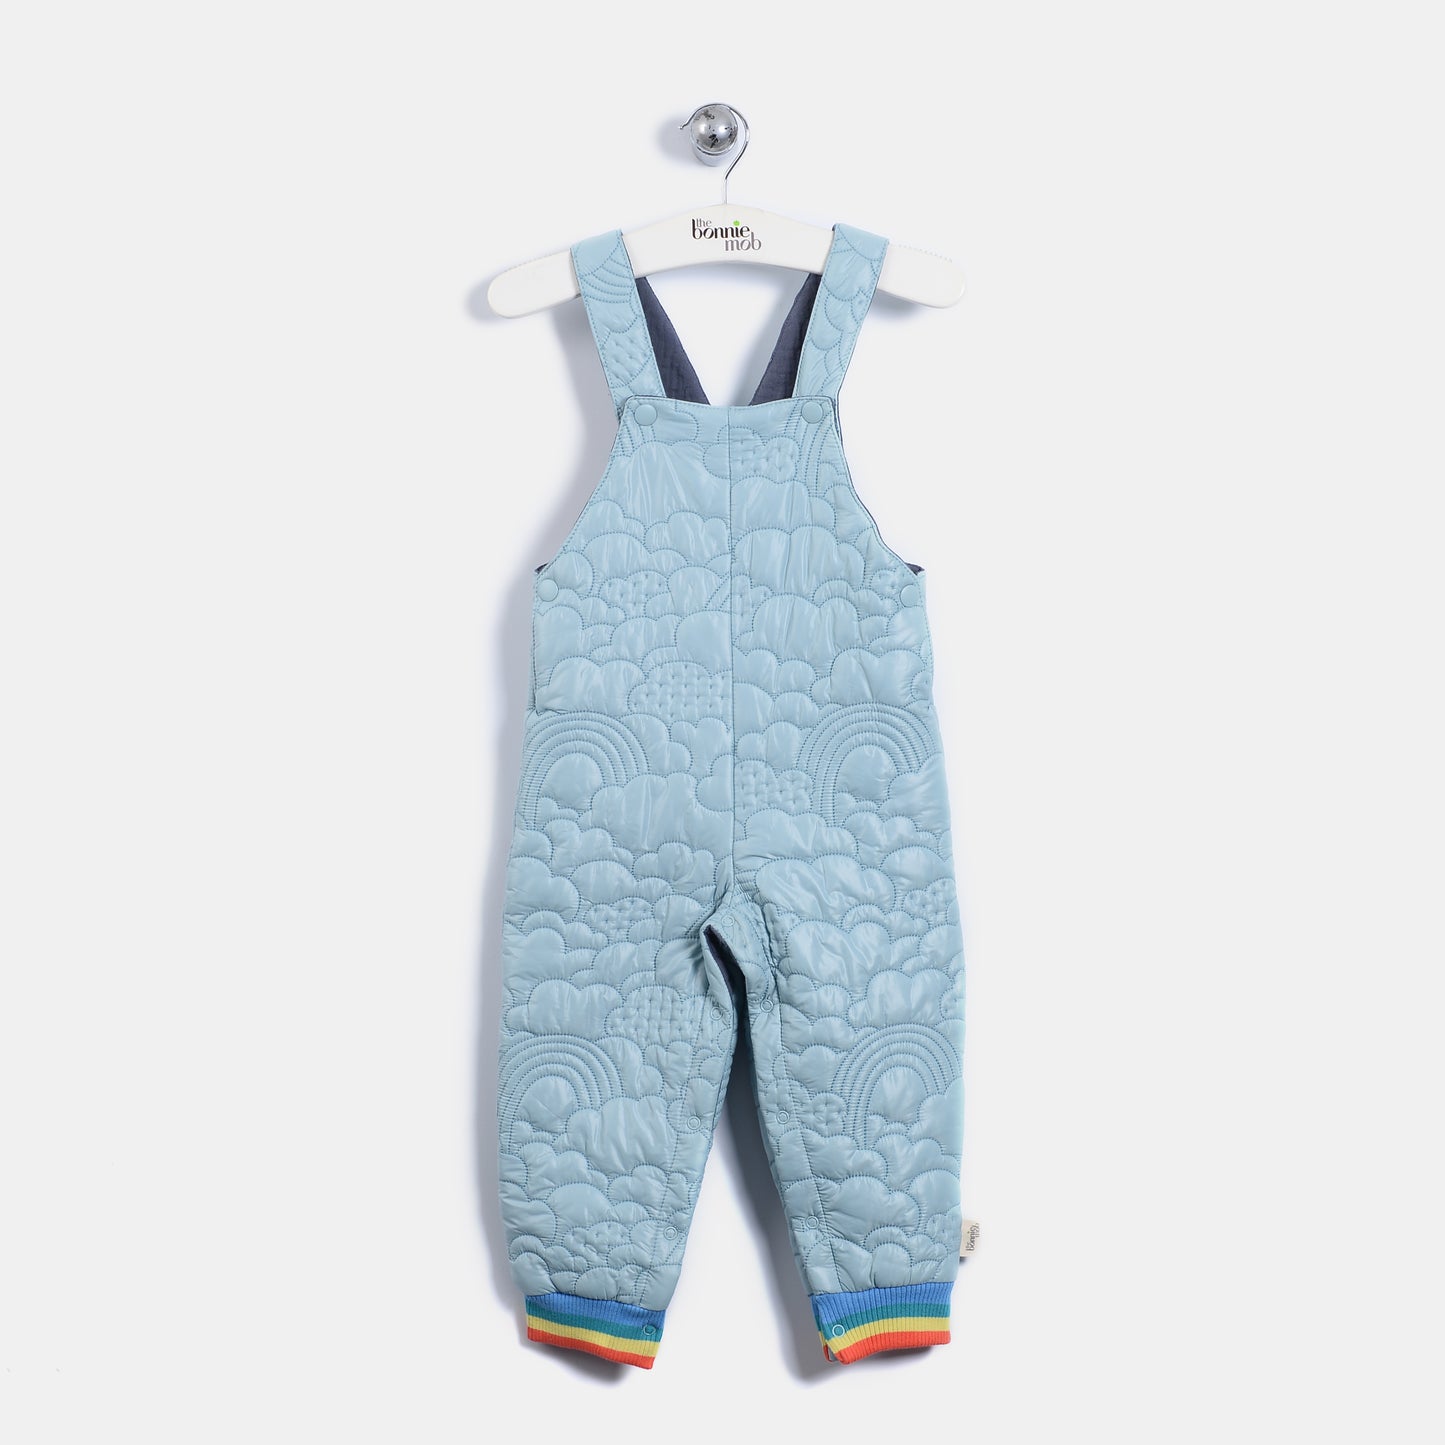 DUNGAREE - BABY - VINTAGE BLUE - L-BEVERLY